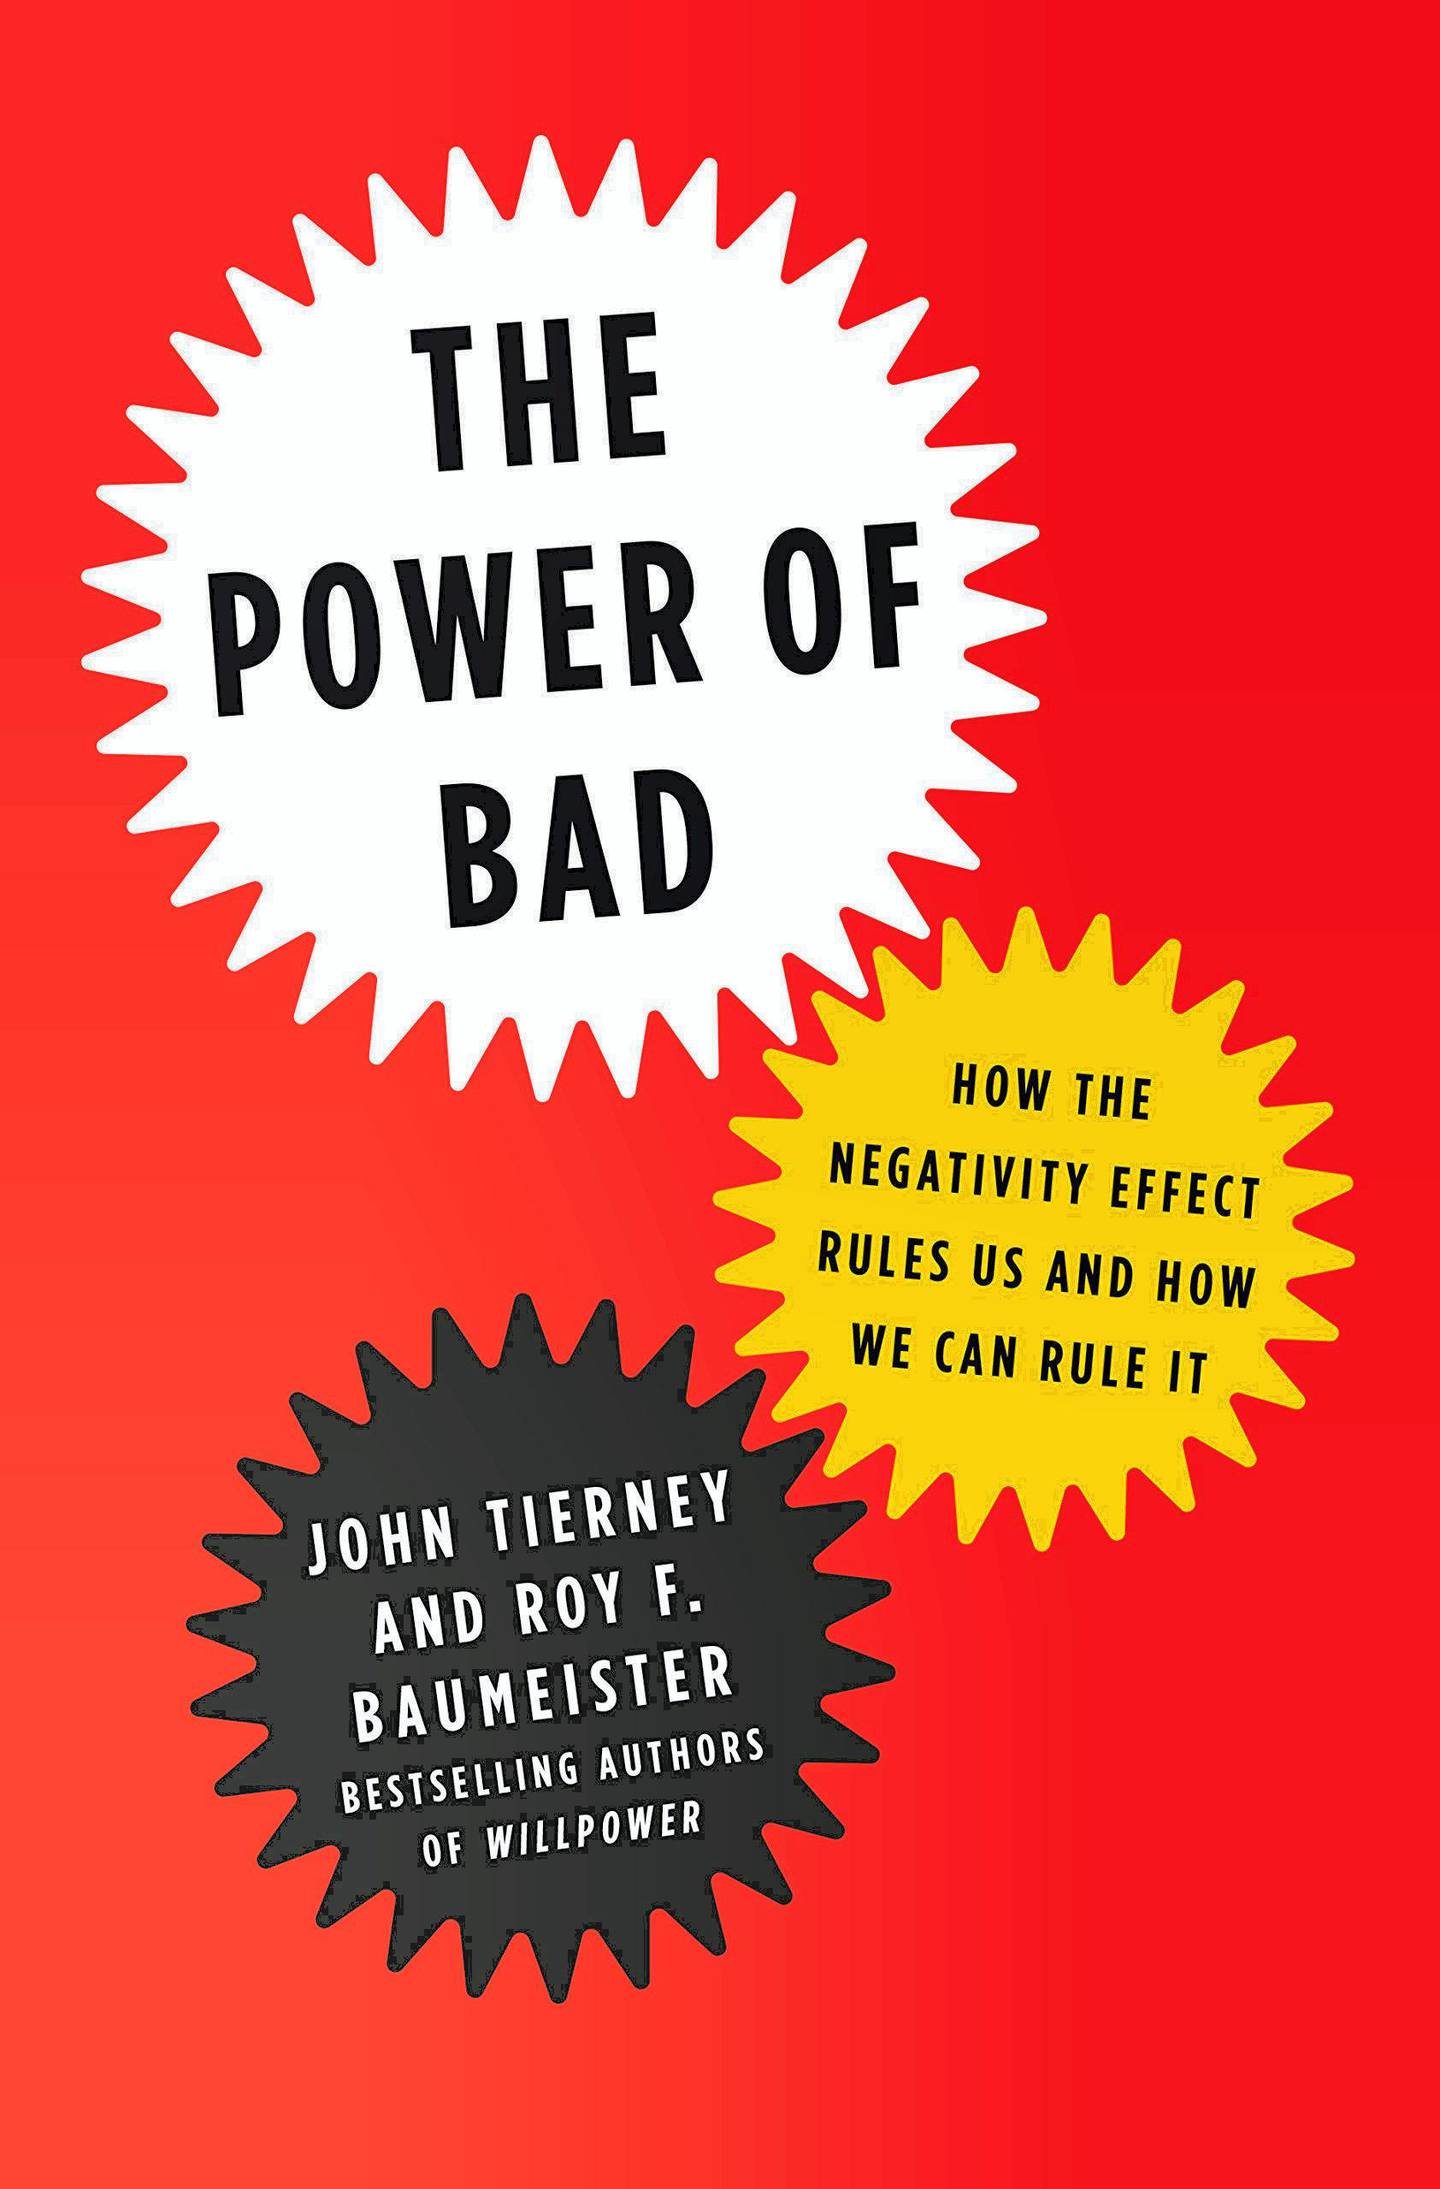 The Power of Bad by John Tierney and Roy F Baumeister